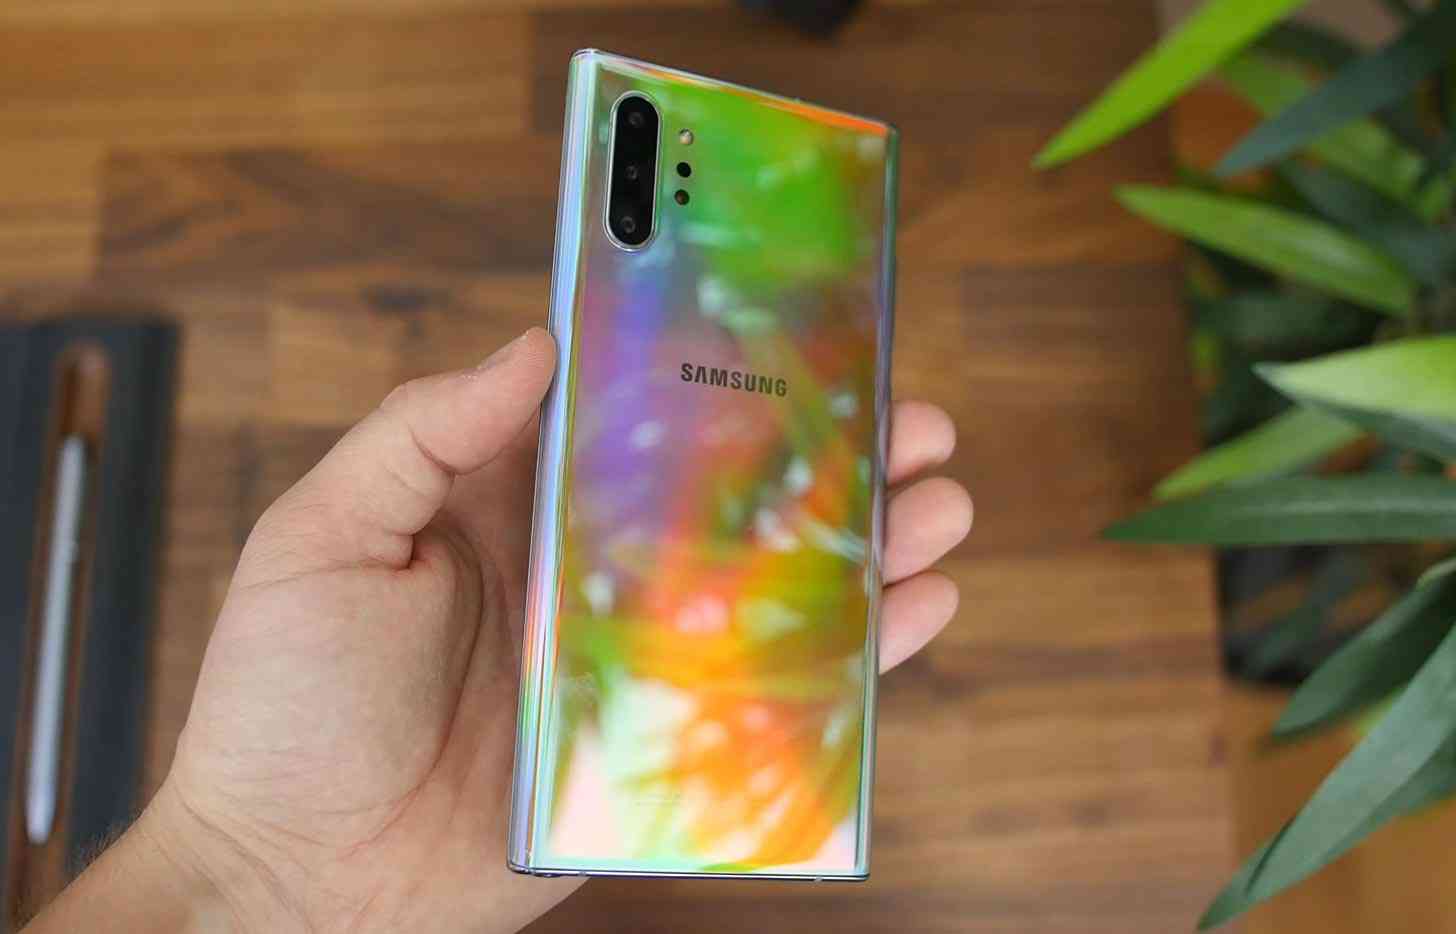 Galaxy Note 10+ unboxing